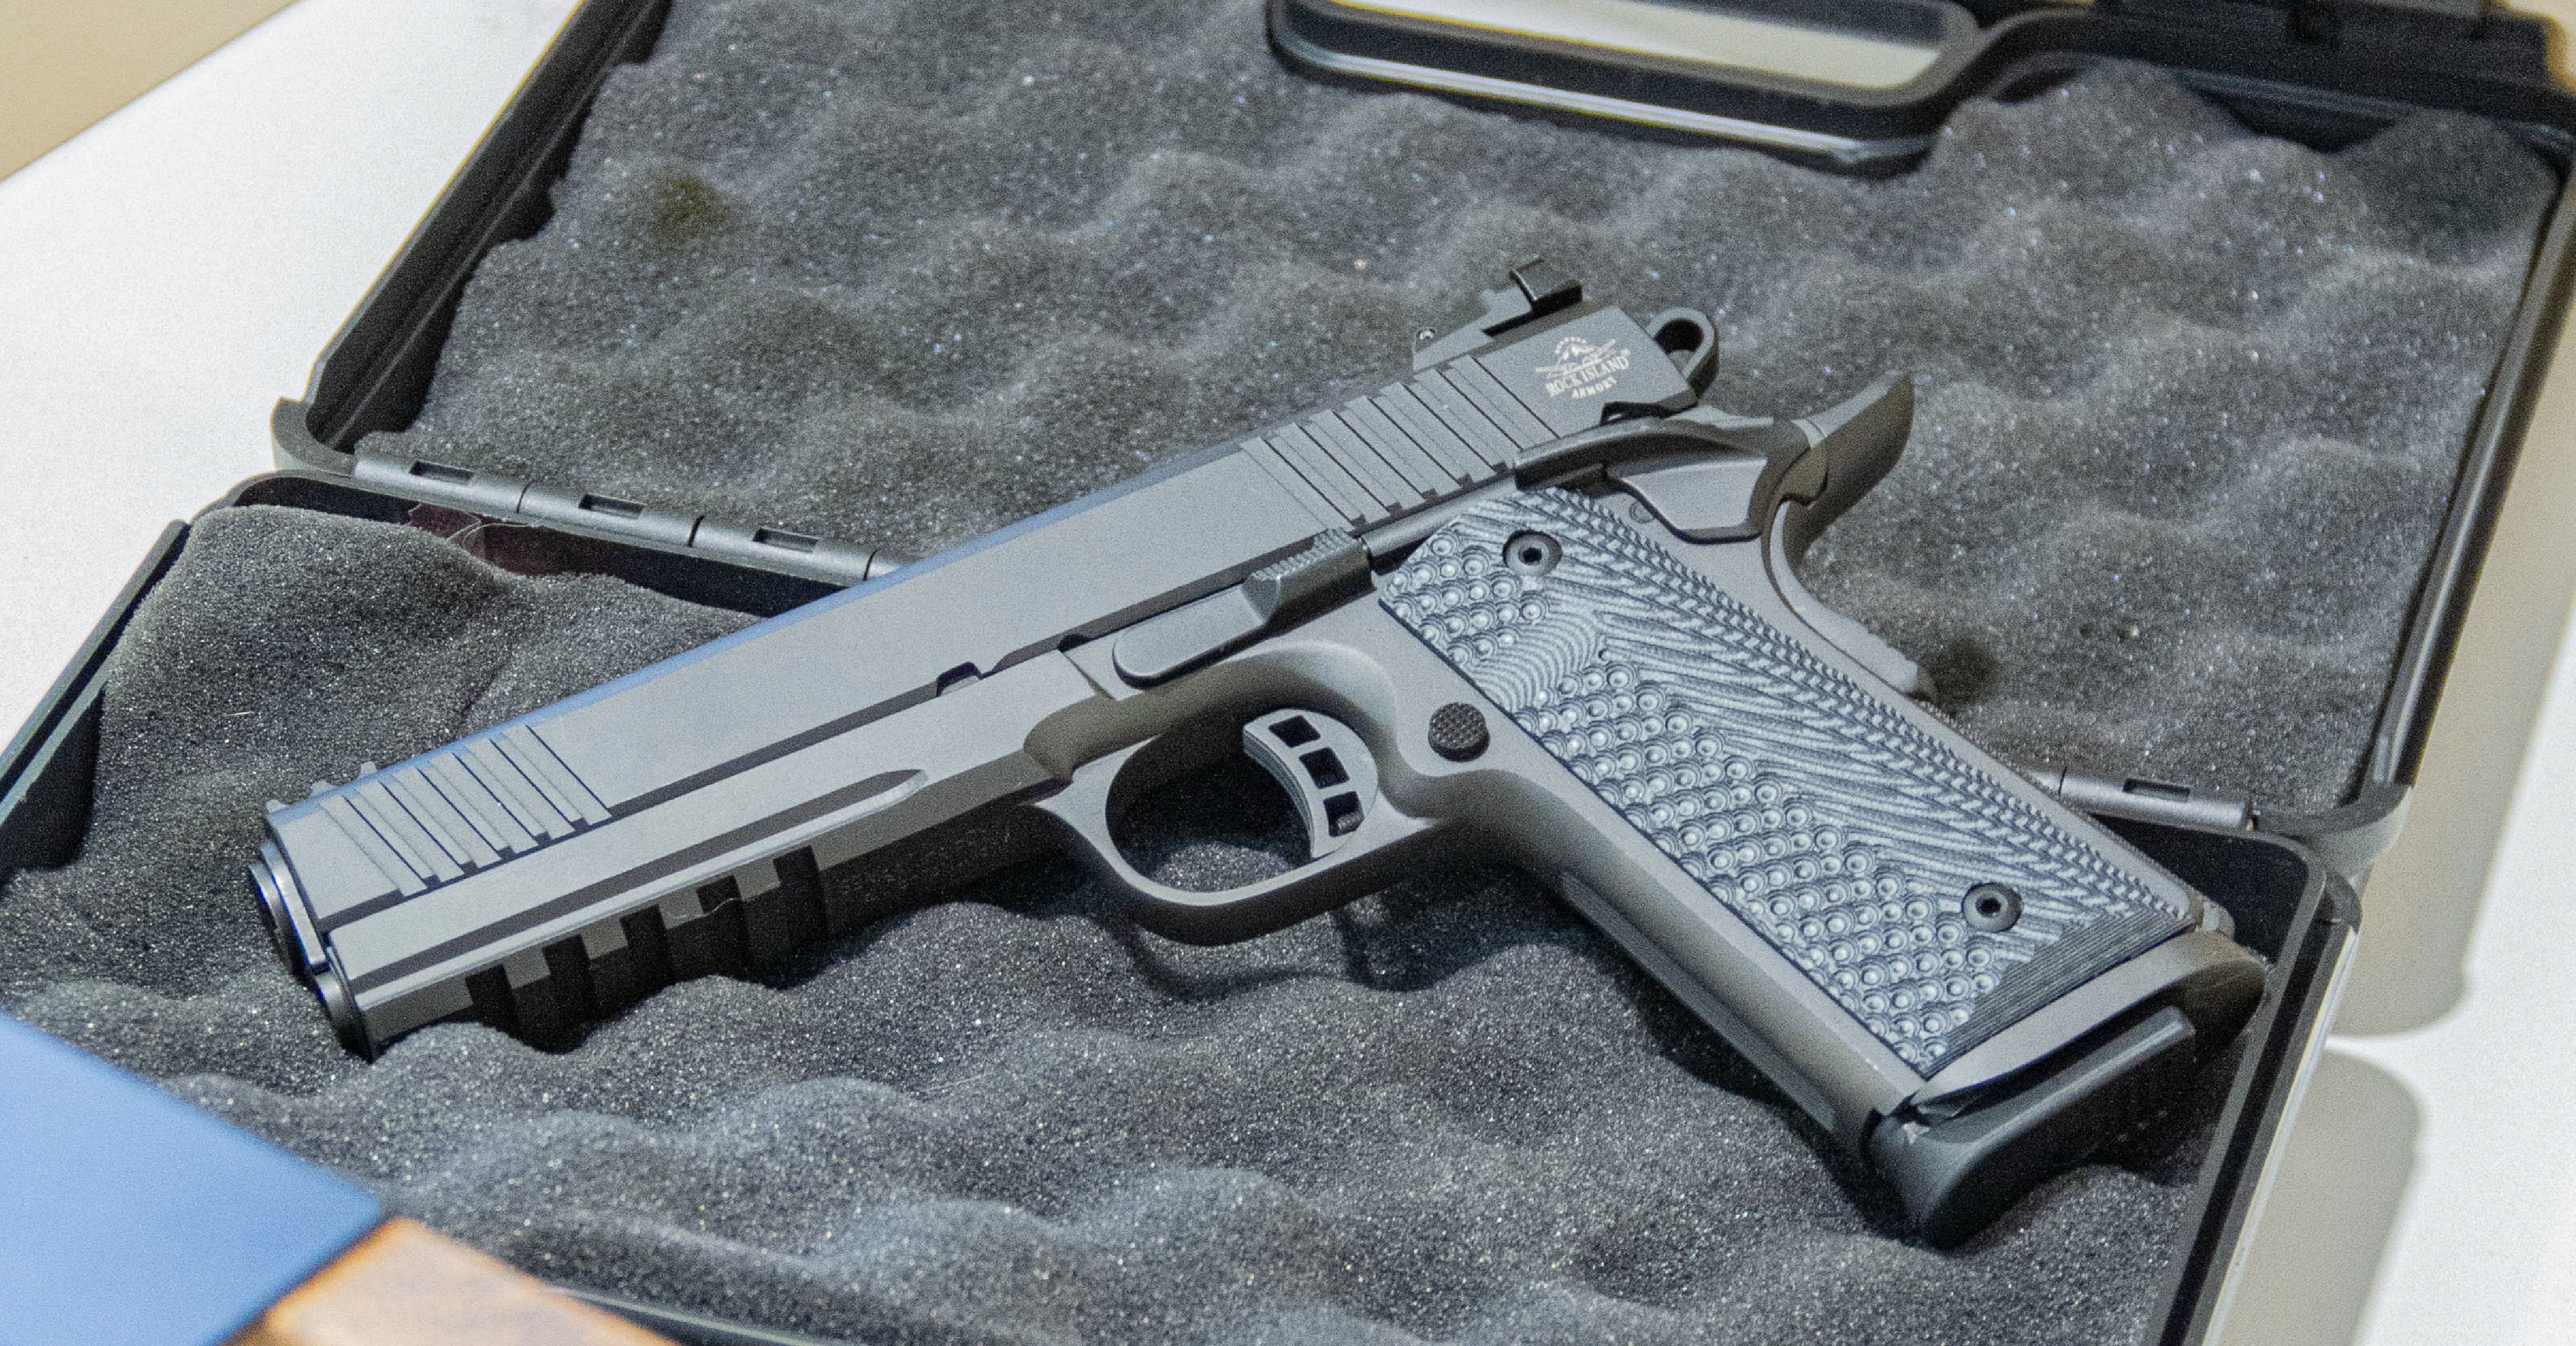 Why Choose a 1911 for Home Defense?